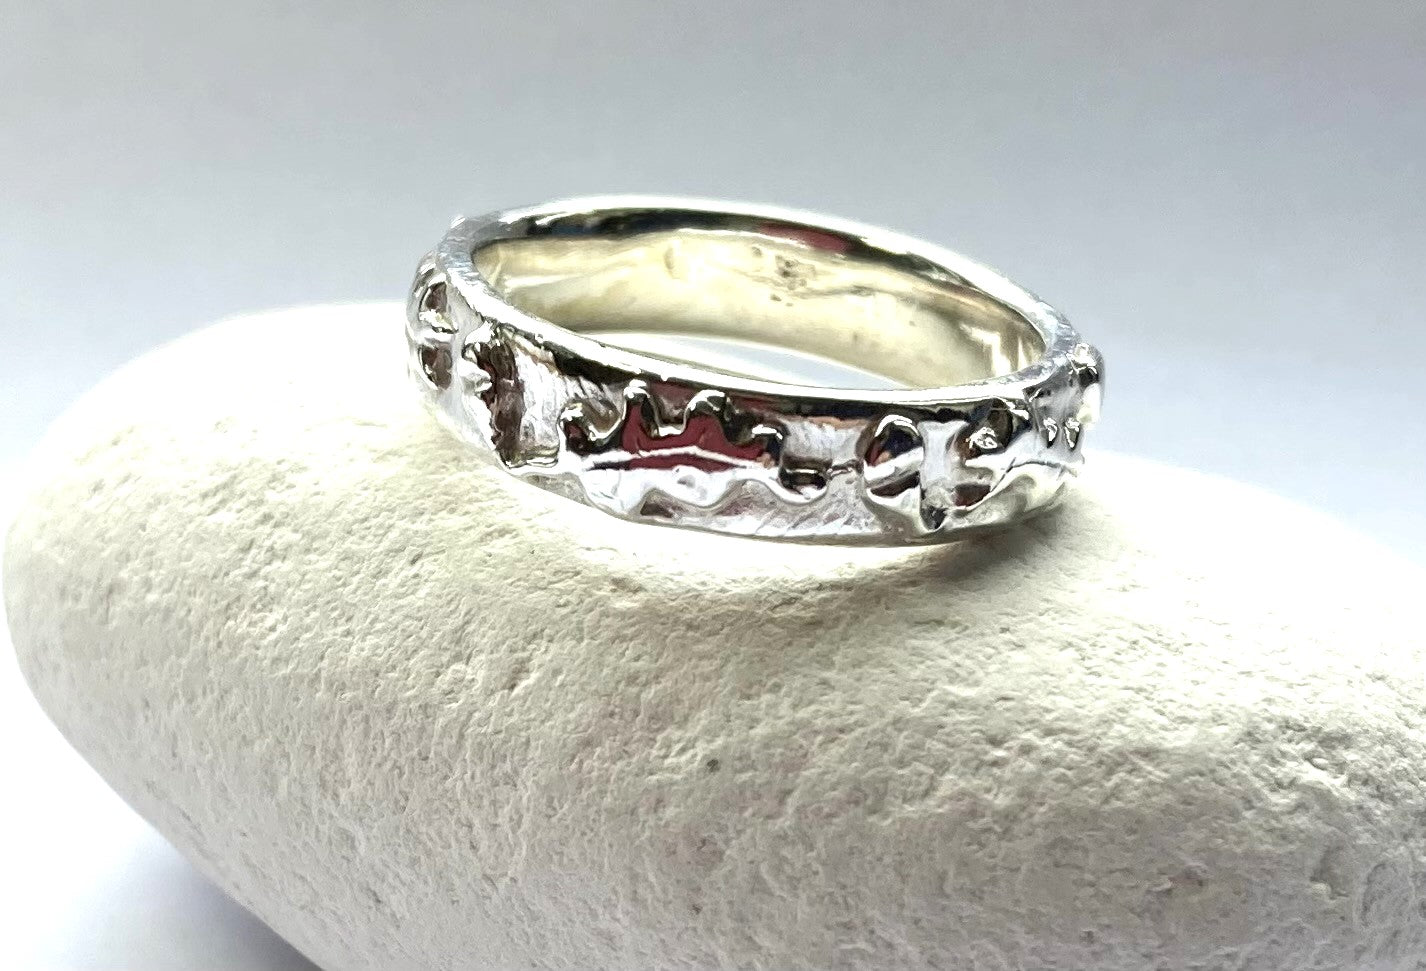 oak and acorn pattern wedding ring in white metal, resting on a white pebble